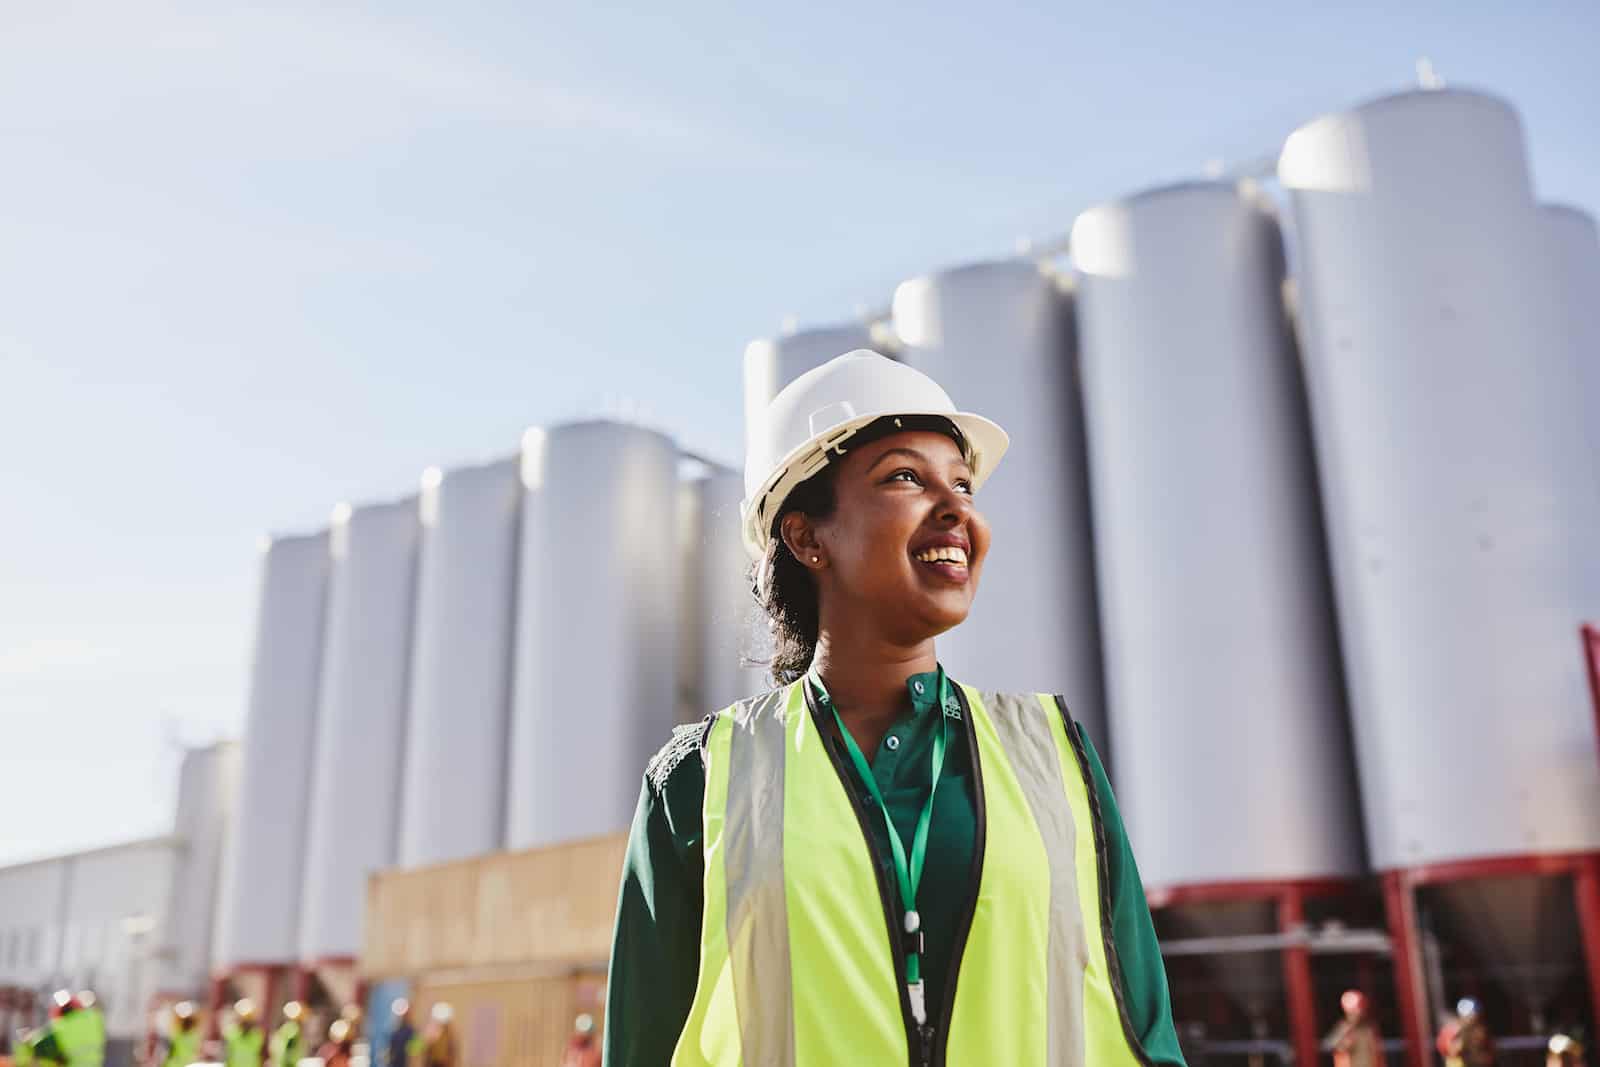 A woman in a yellow safety vest and hard hat stands in front of a manufacturing plant, looking up to the sky. 